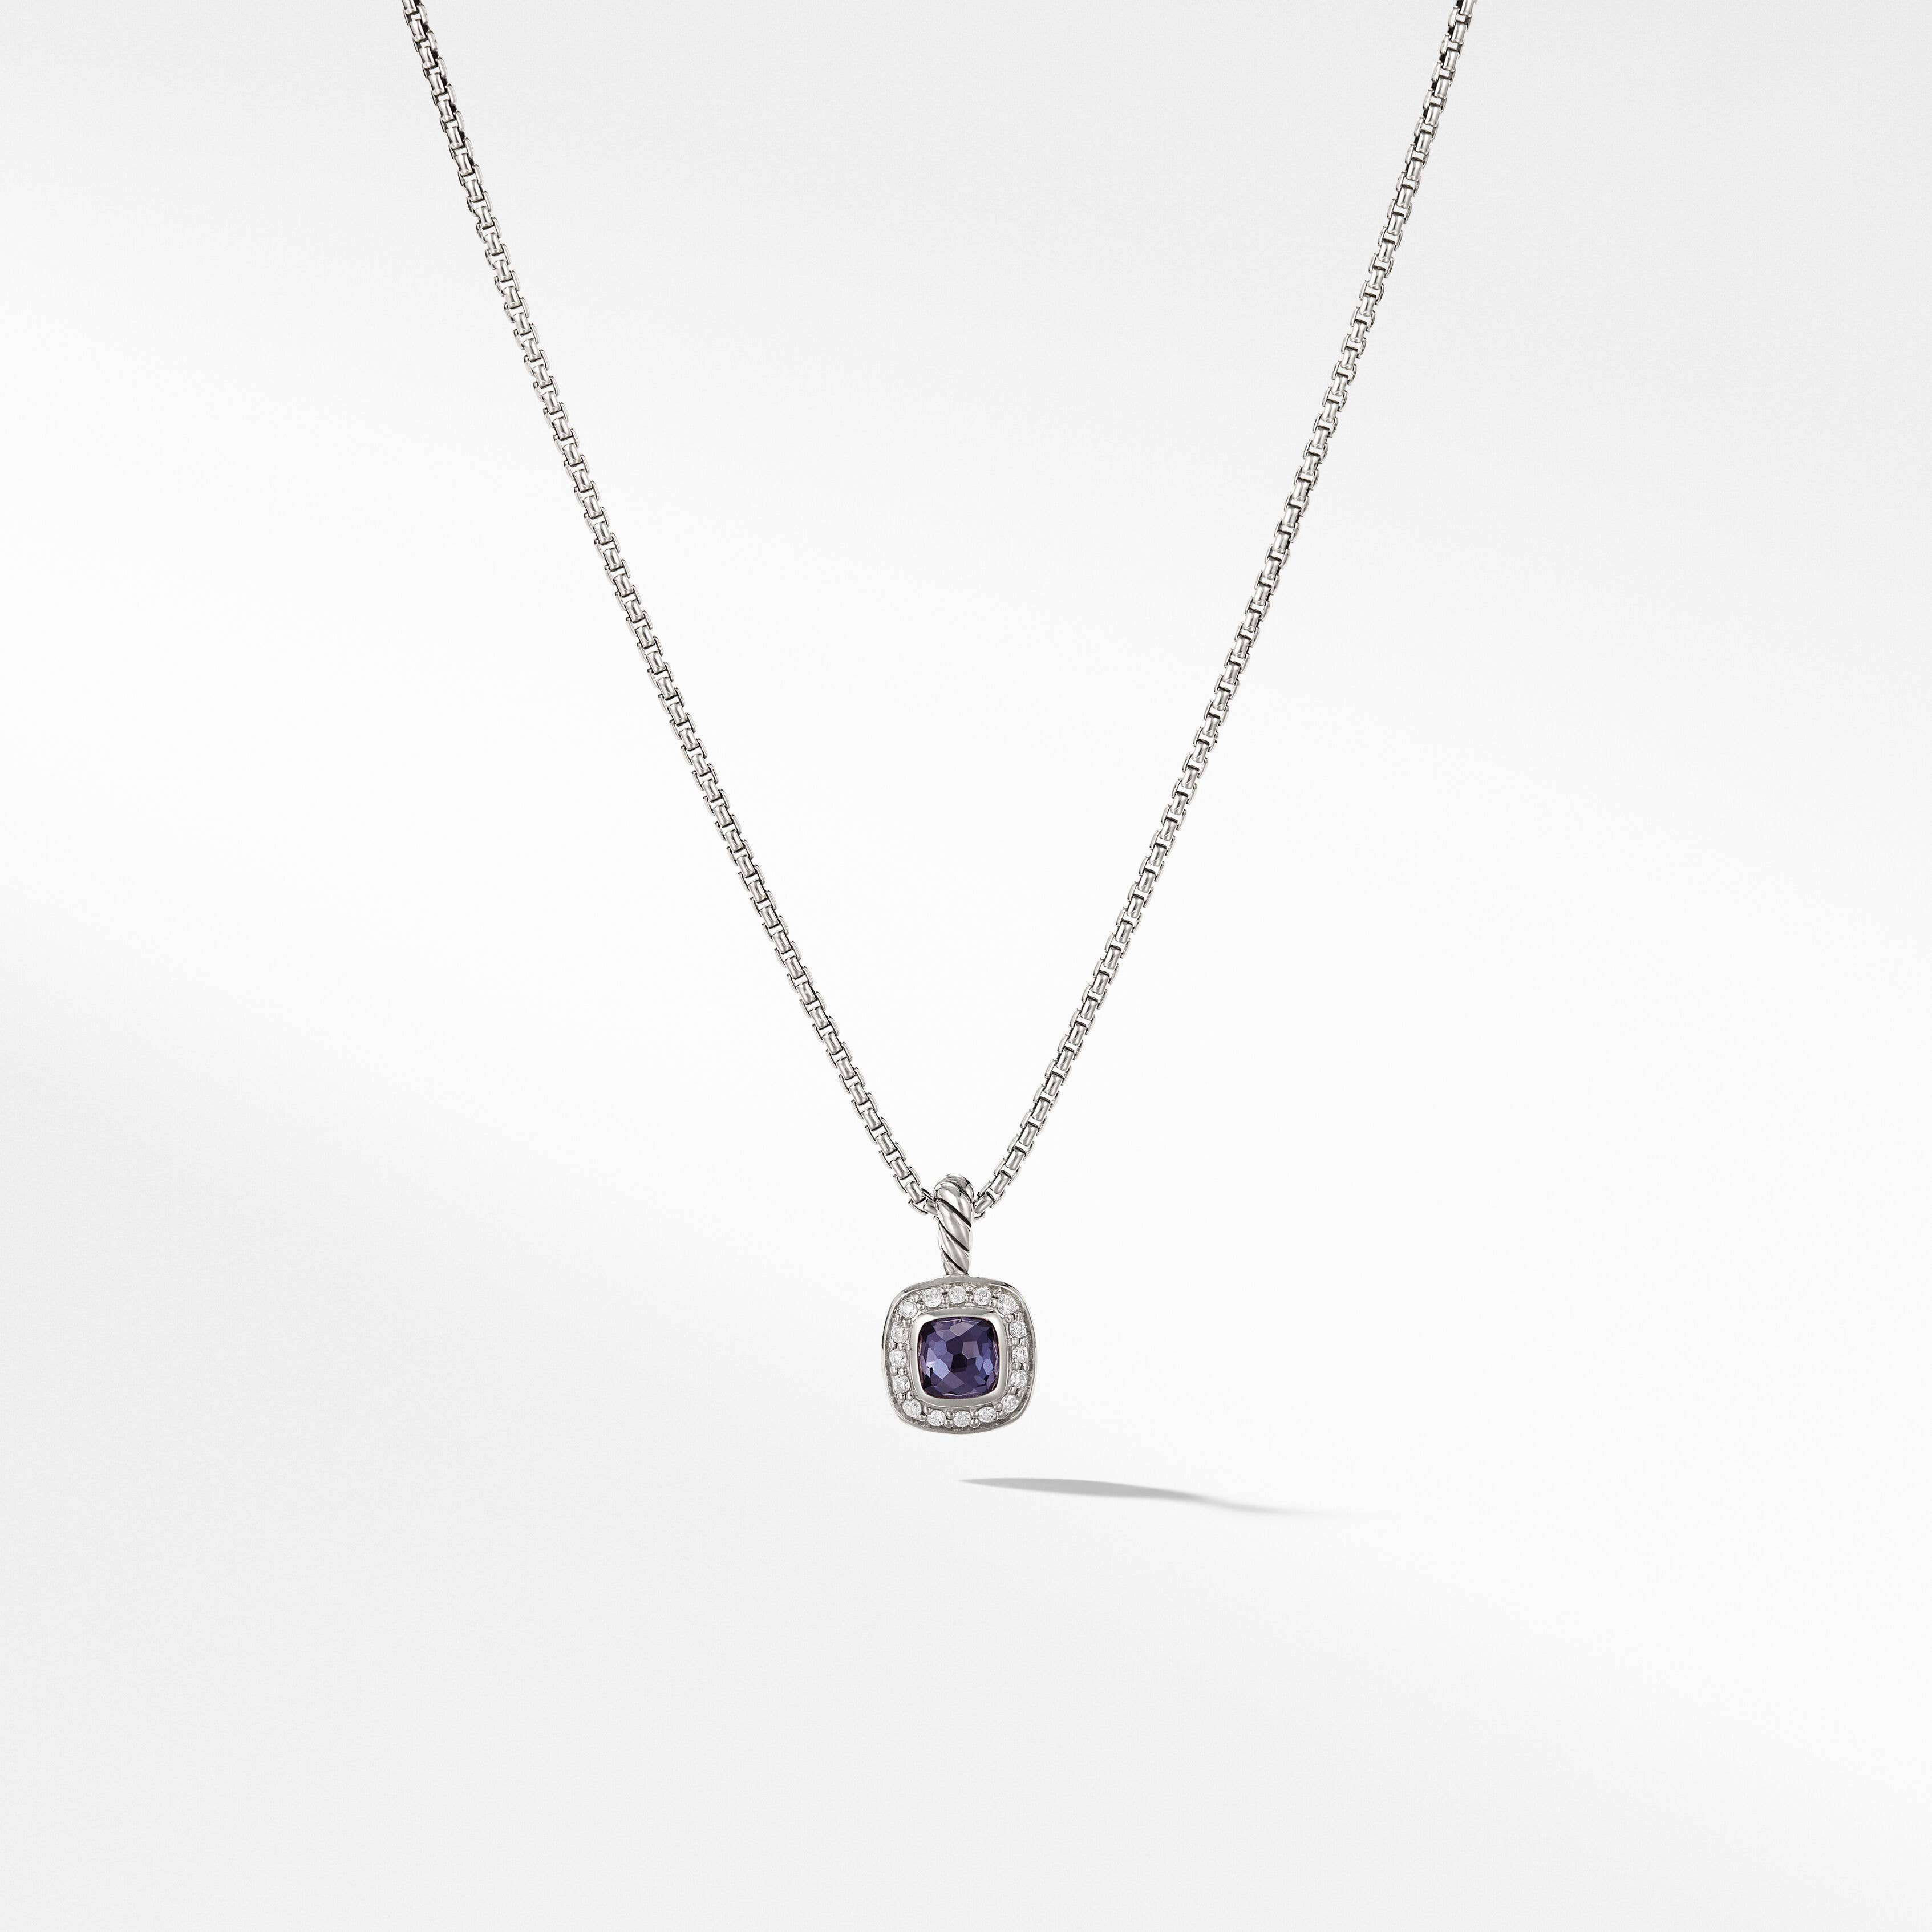 Albion® Kids Pendant Necklace in Sterling Silver with Black Orchid and Pavé Diamonds